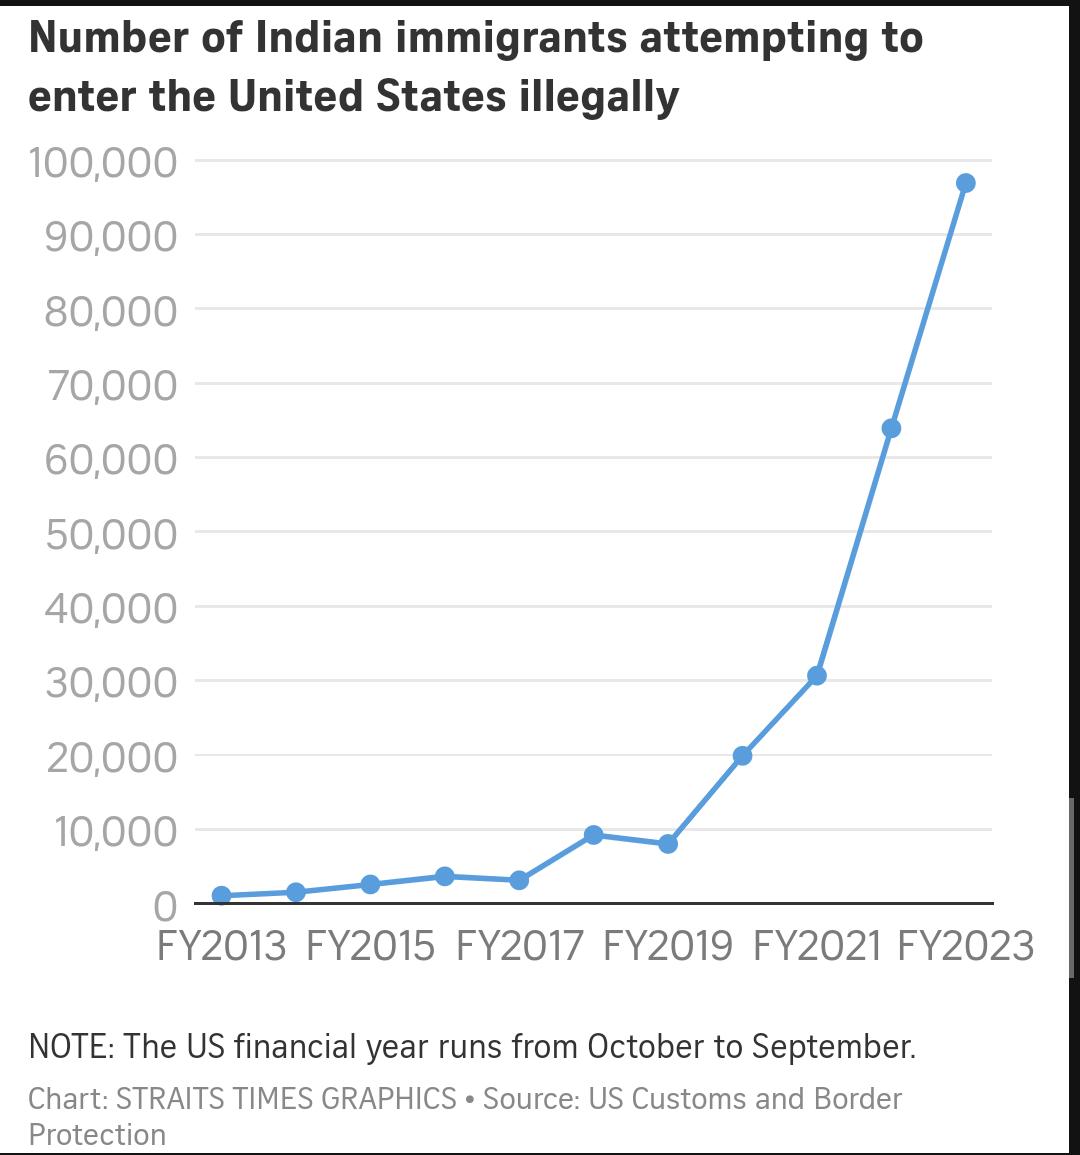 illegal-migration-from-india-to-usa-v0-of4d3w8xcy9c1.jpeg